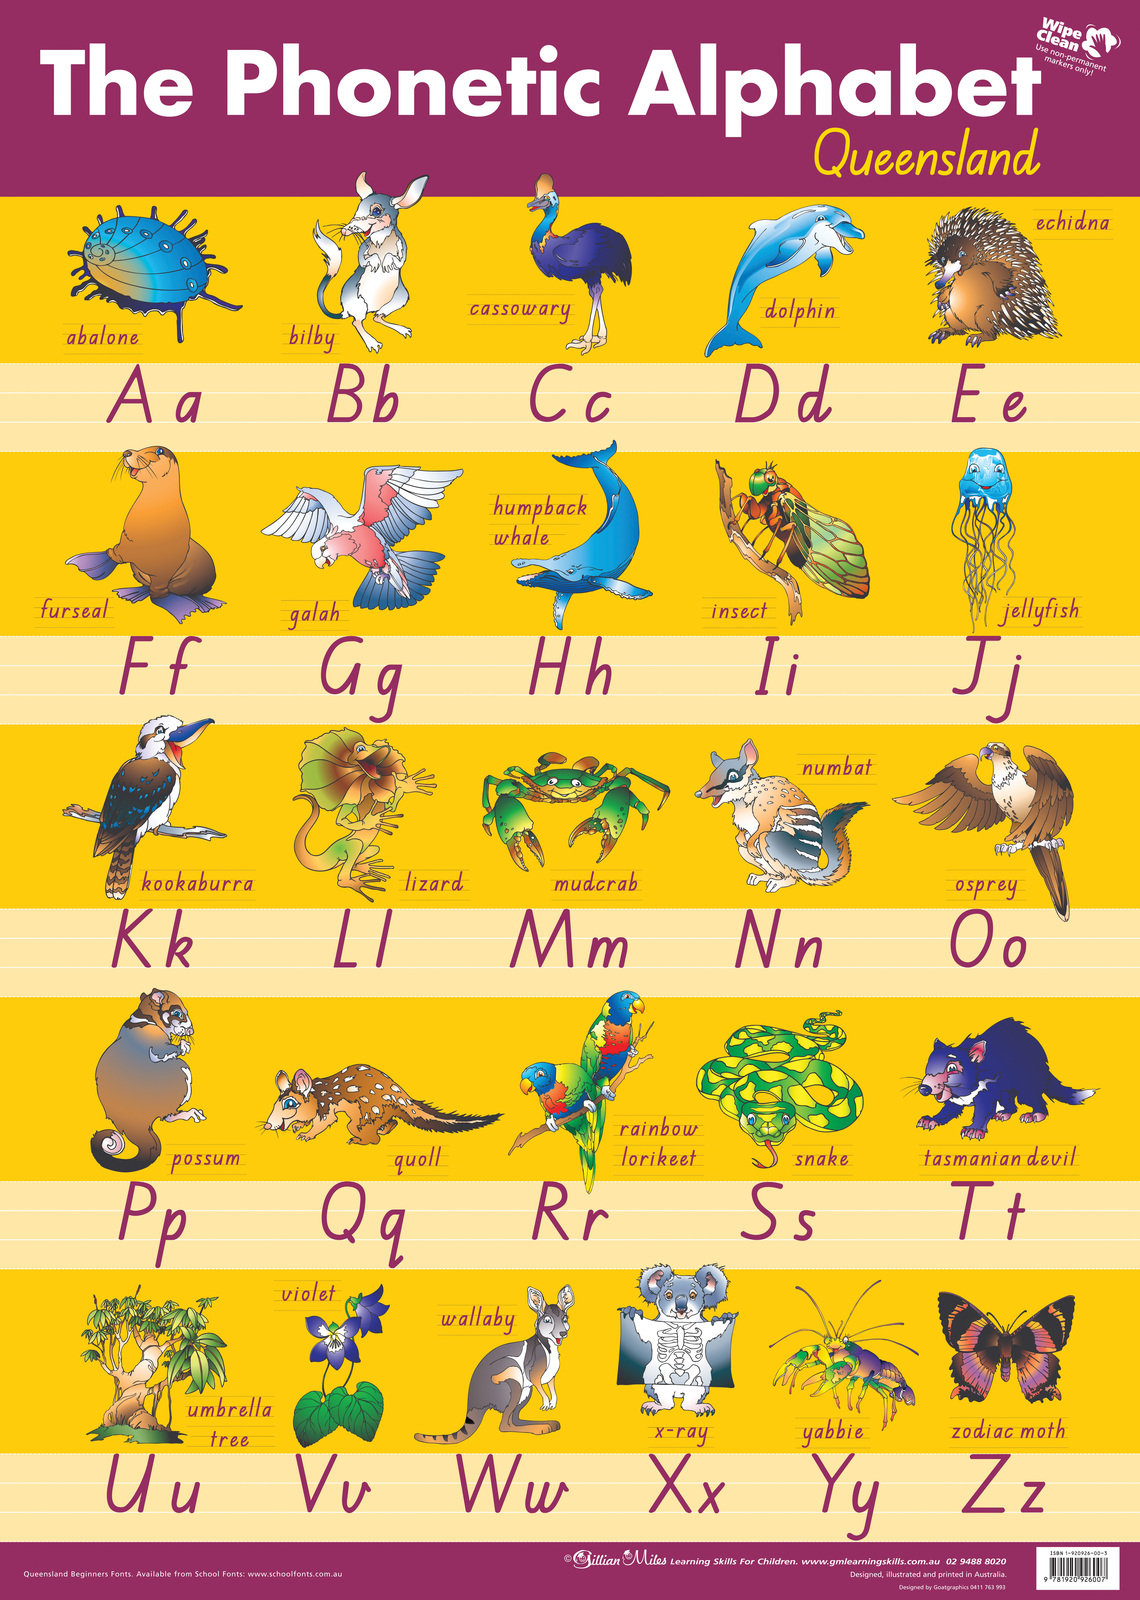 visual-the-phonetic-alphabet-with-pictures-infographictv-number-images